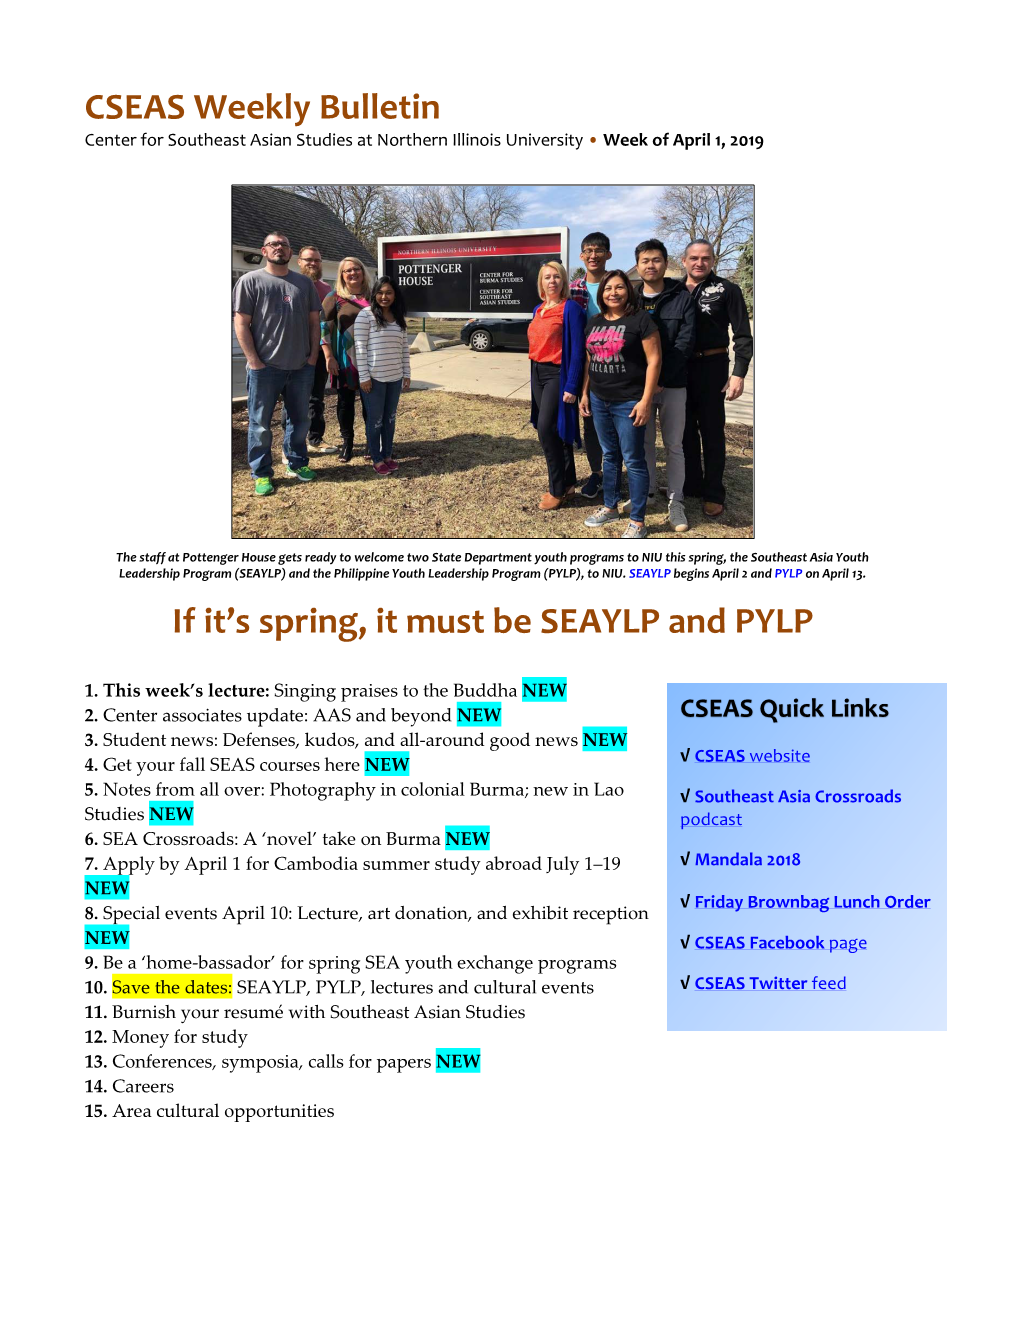 CSEAS Weekly Bulletin If It's Spring, It Must Be SEAYLP and PYLP